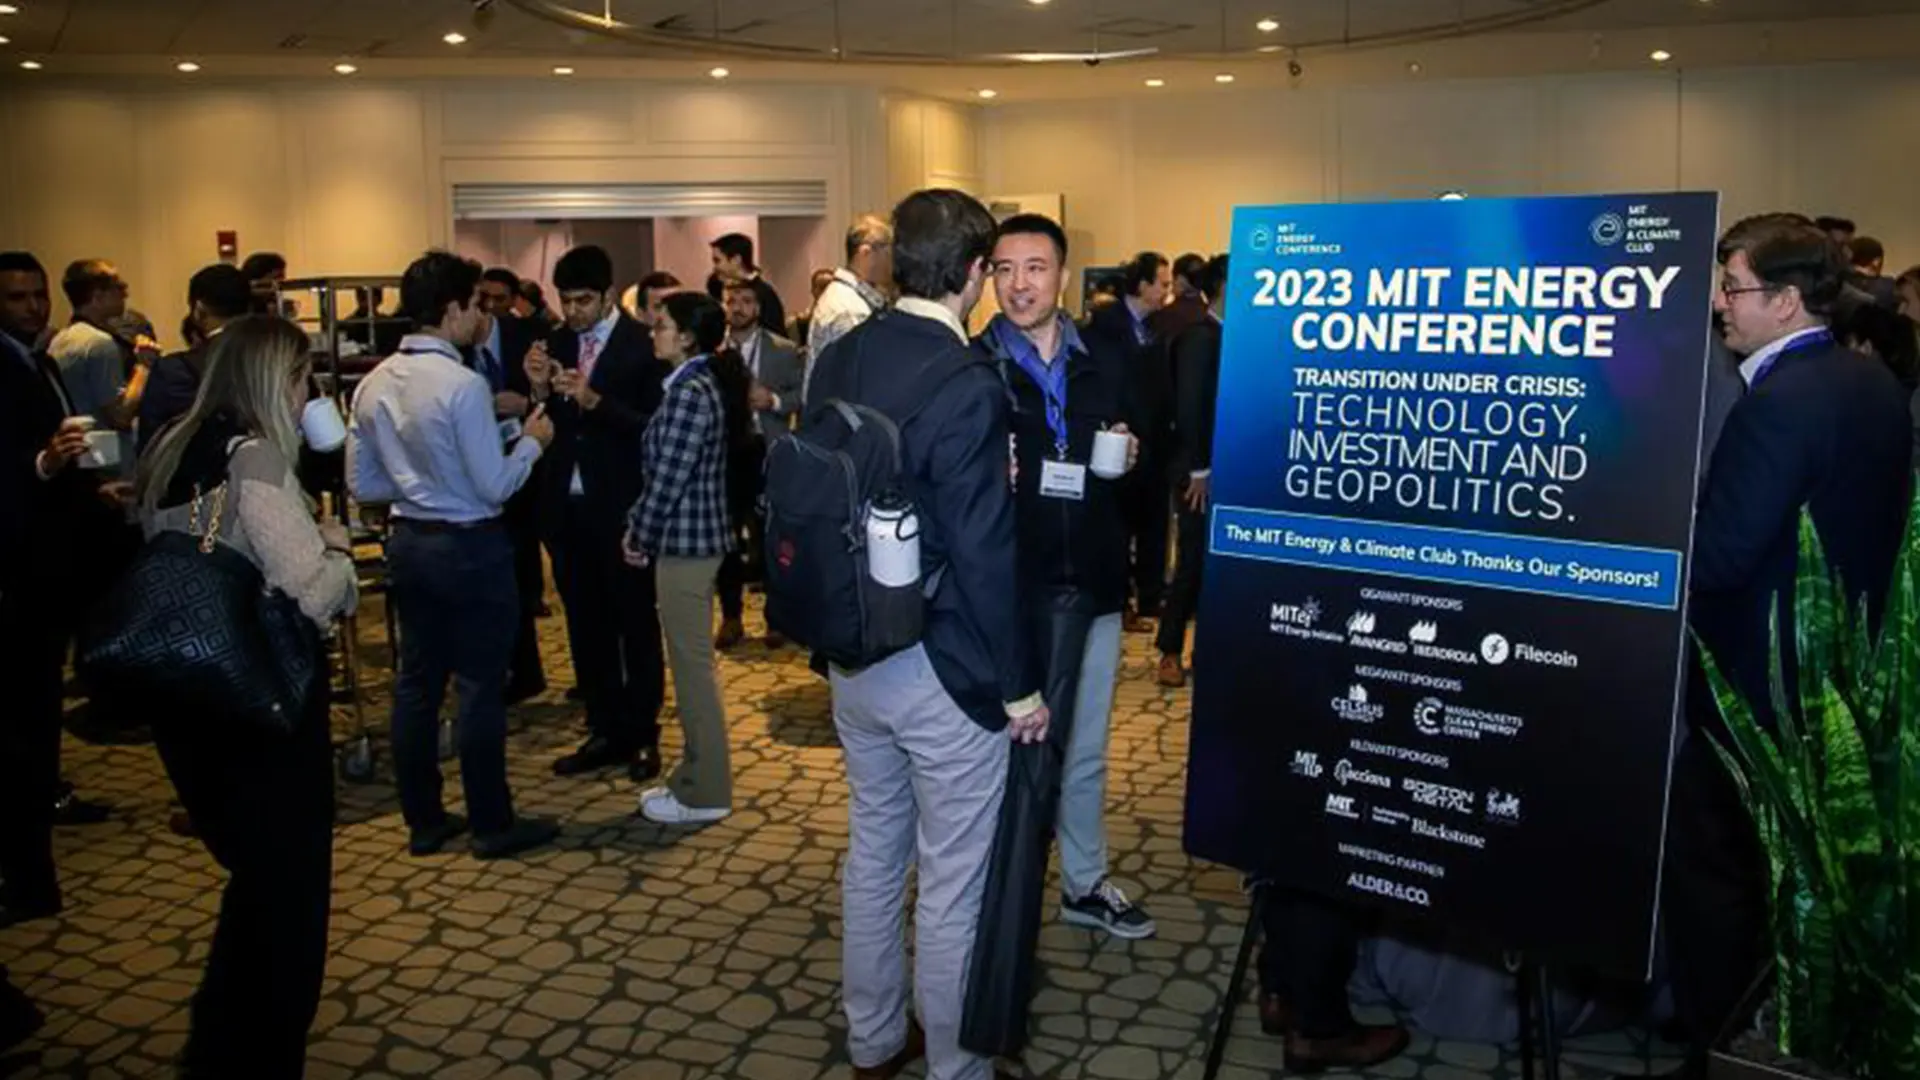 Attendees gather in groups, chatting at the 2023 MIT Energy Conference.